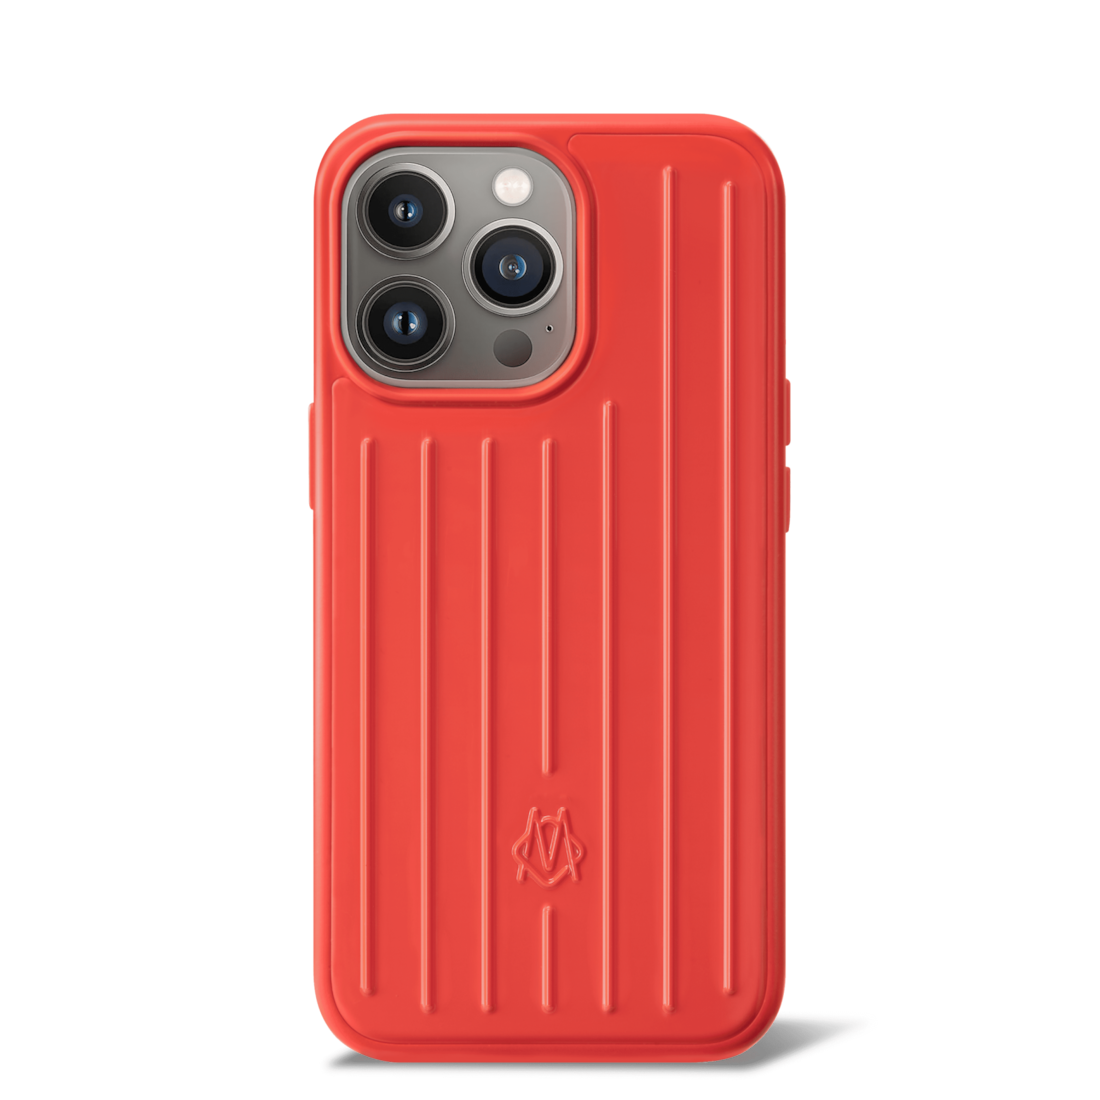 iPhone Accessories Flamingo Red Case for iPhone 13 Pro